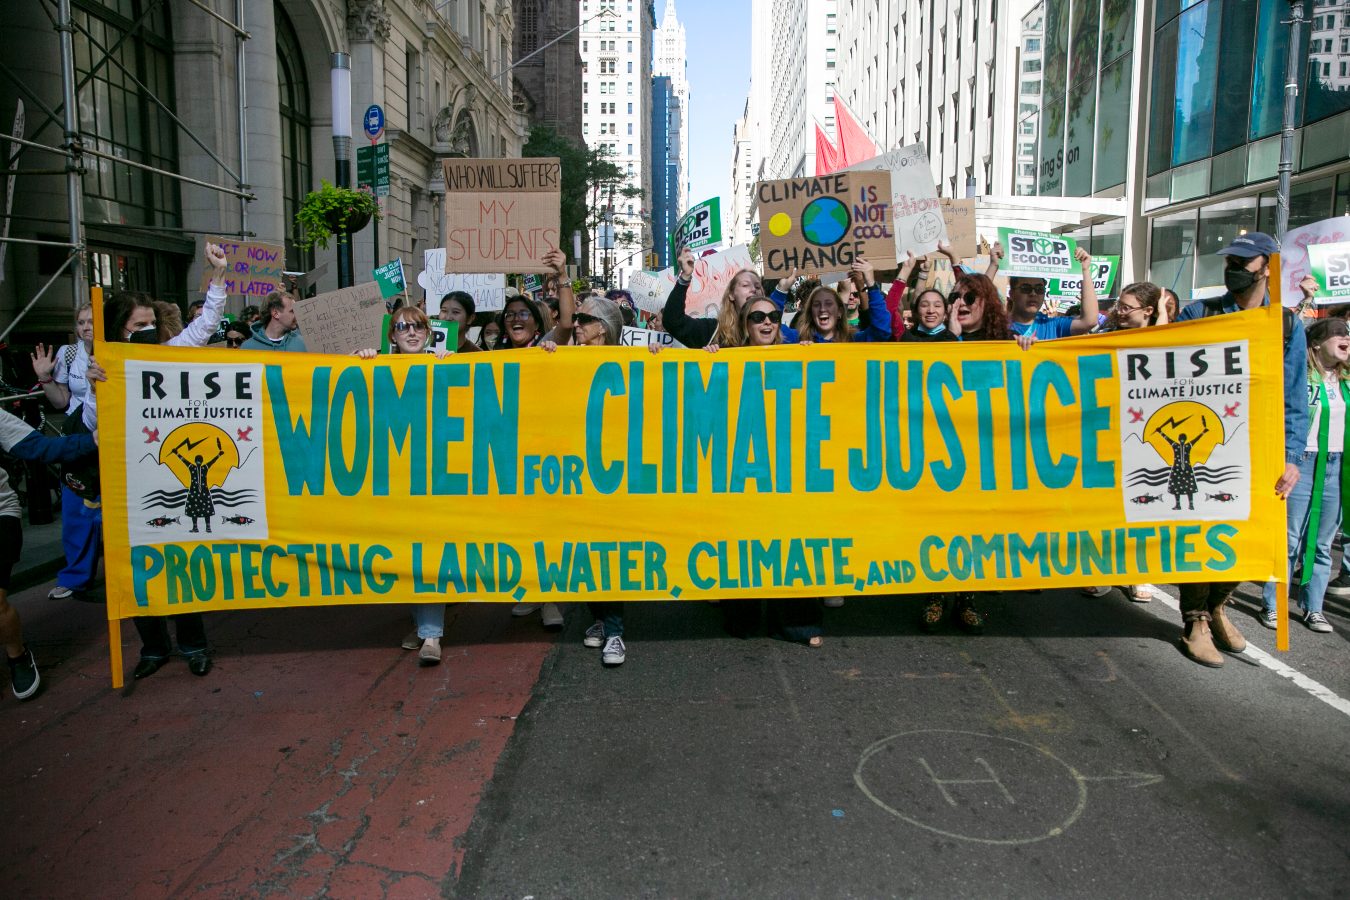 a group of women walk down a city street chanting and carrying a sign for climate justice